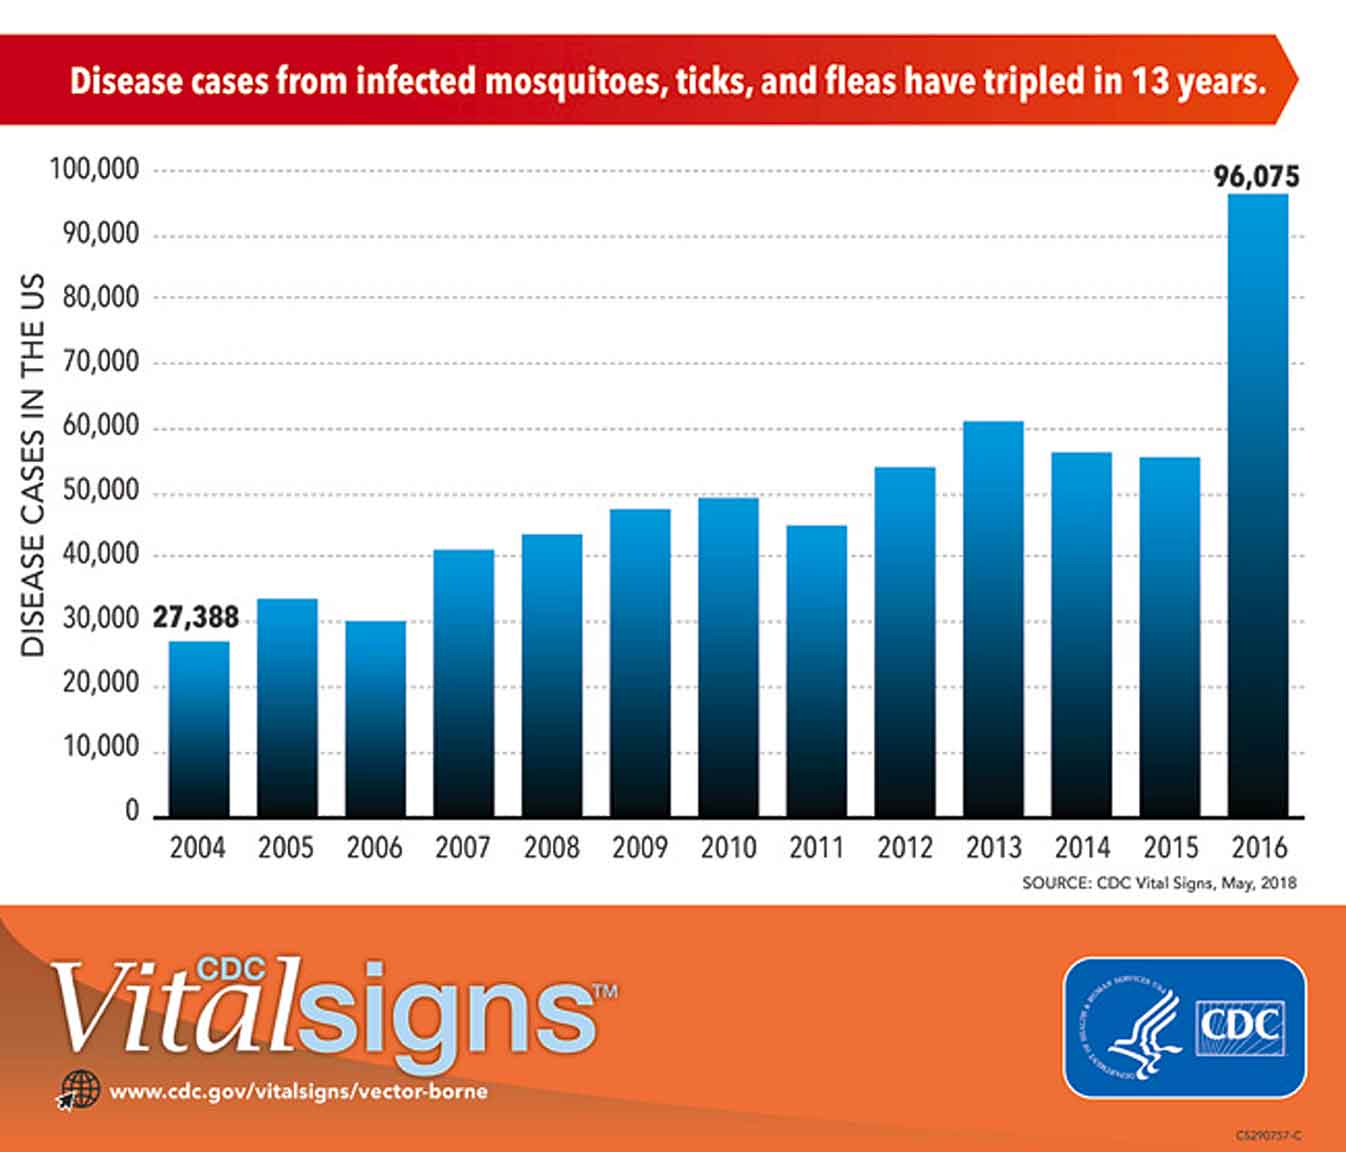 Disease cases from infected mosquitoes, ticks, and fleas have tripled in 13 years. (Courtesy of Vital Signs)